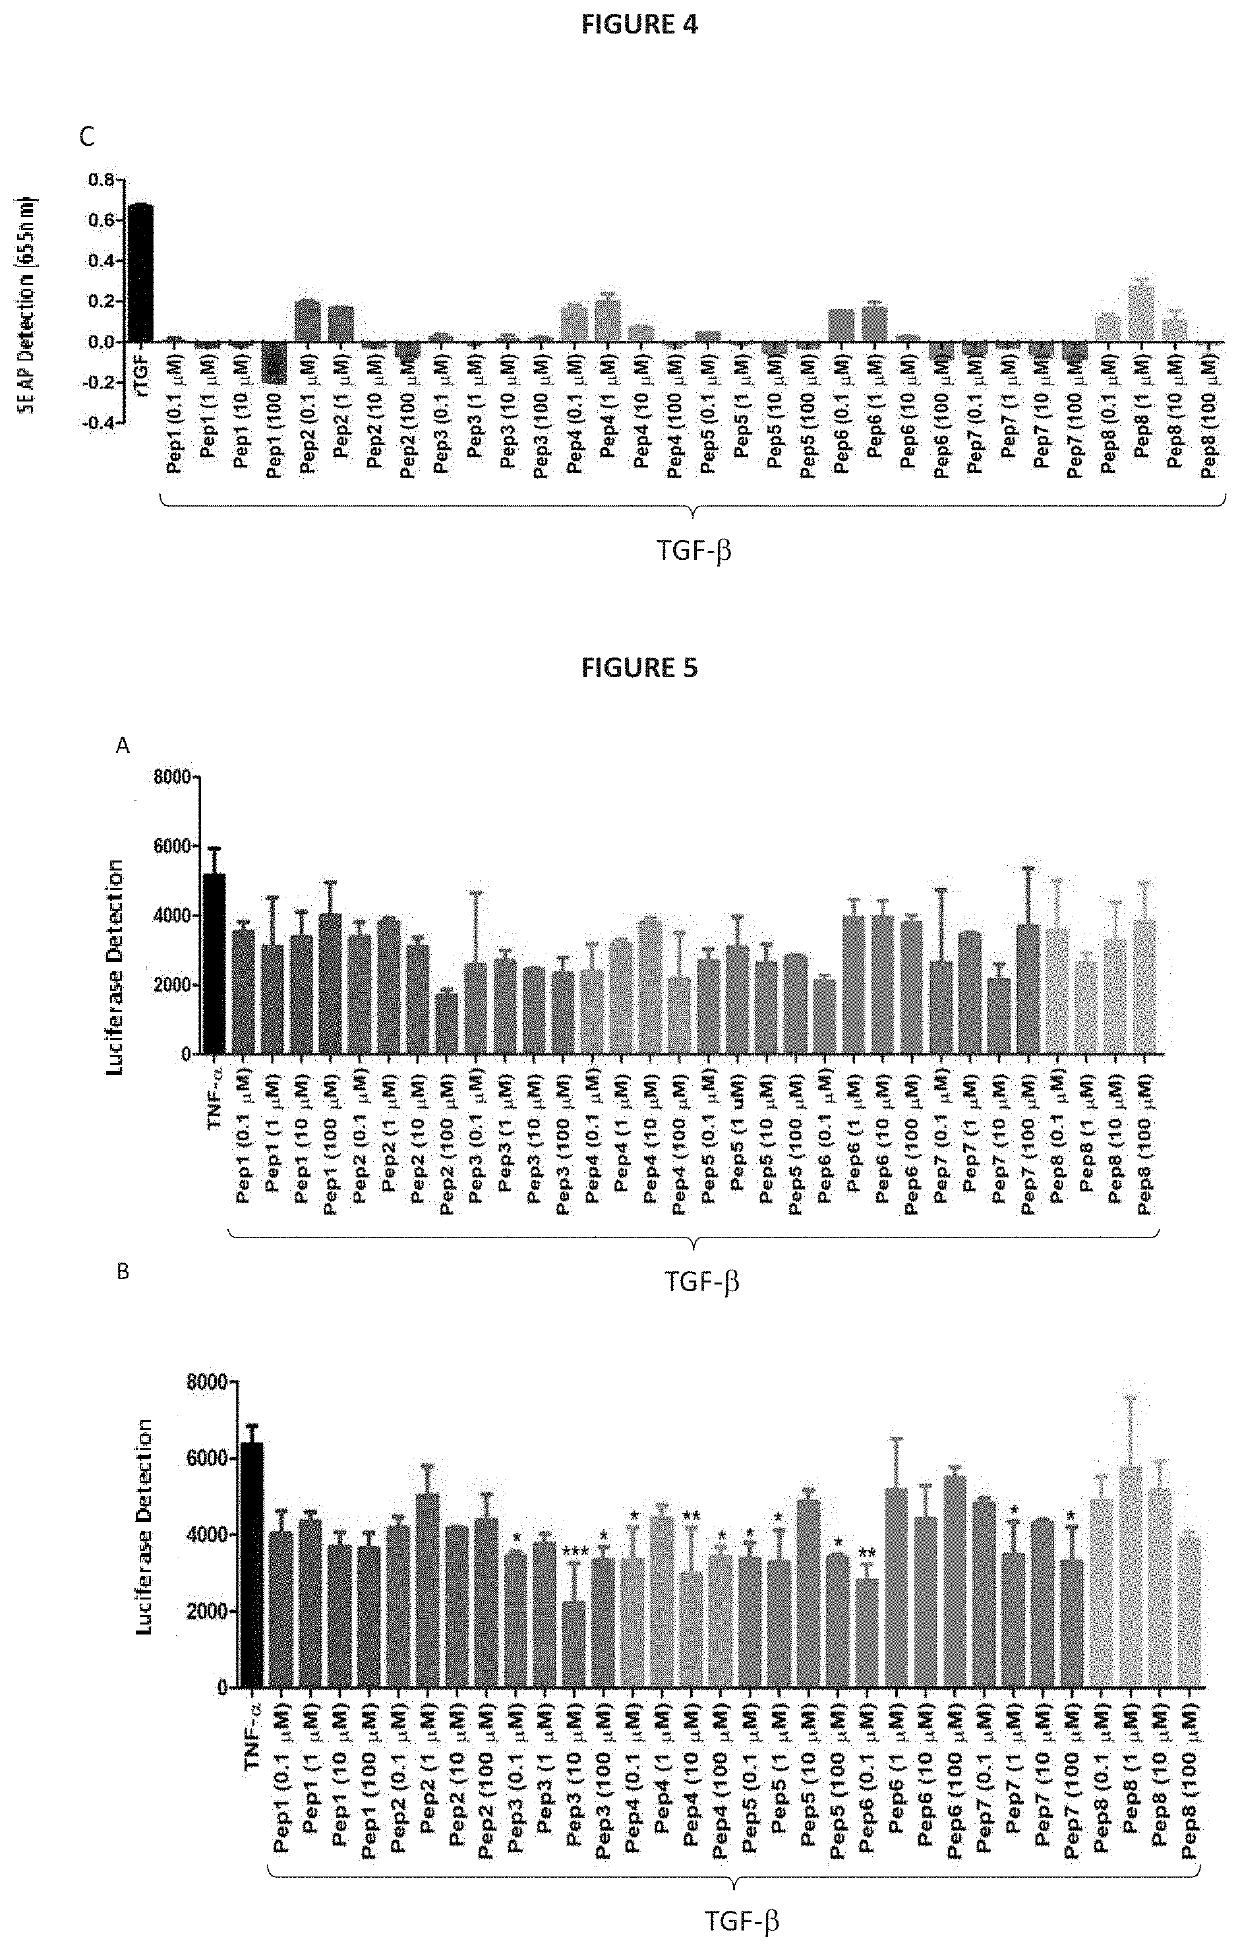 Combination of synthetic peptides with affinity to the tgf-ß receptor and with affinity to the il-10 receptor, pharmaceutical composition and their use as immunomodulators in the treatment of autoimmune, inflammatory or allergic diseases